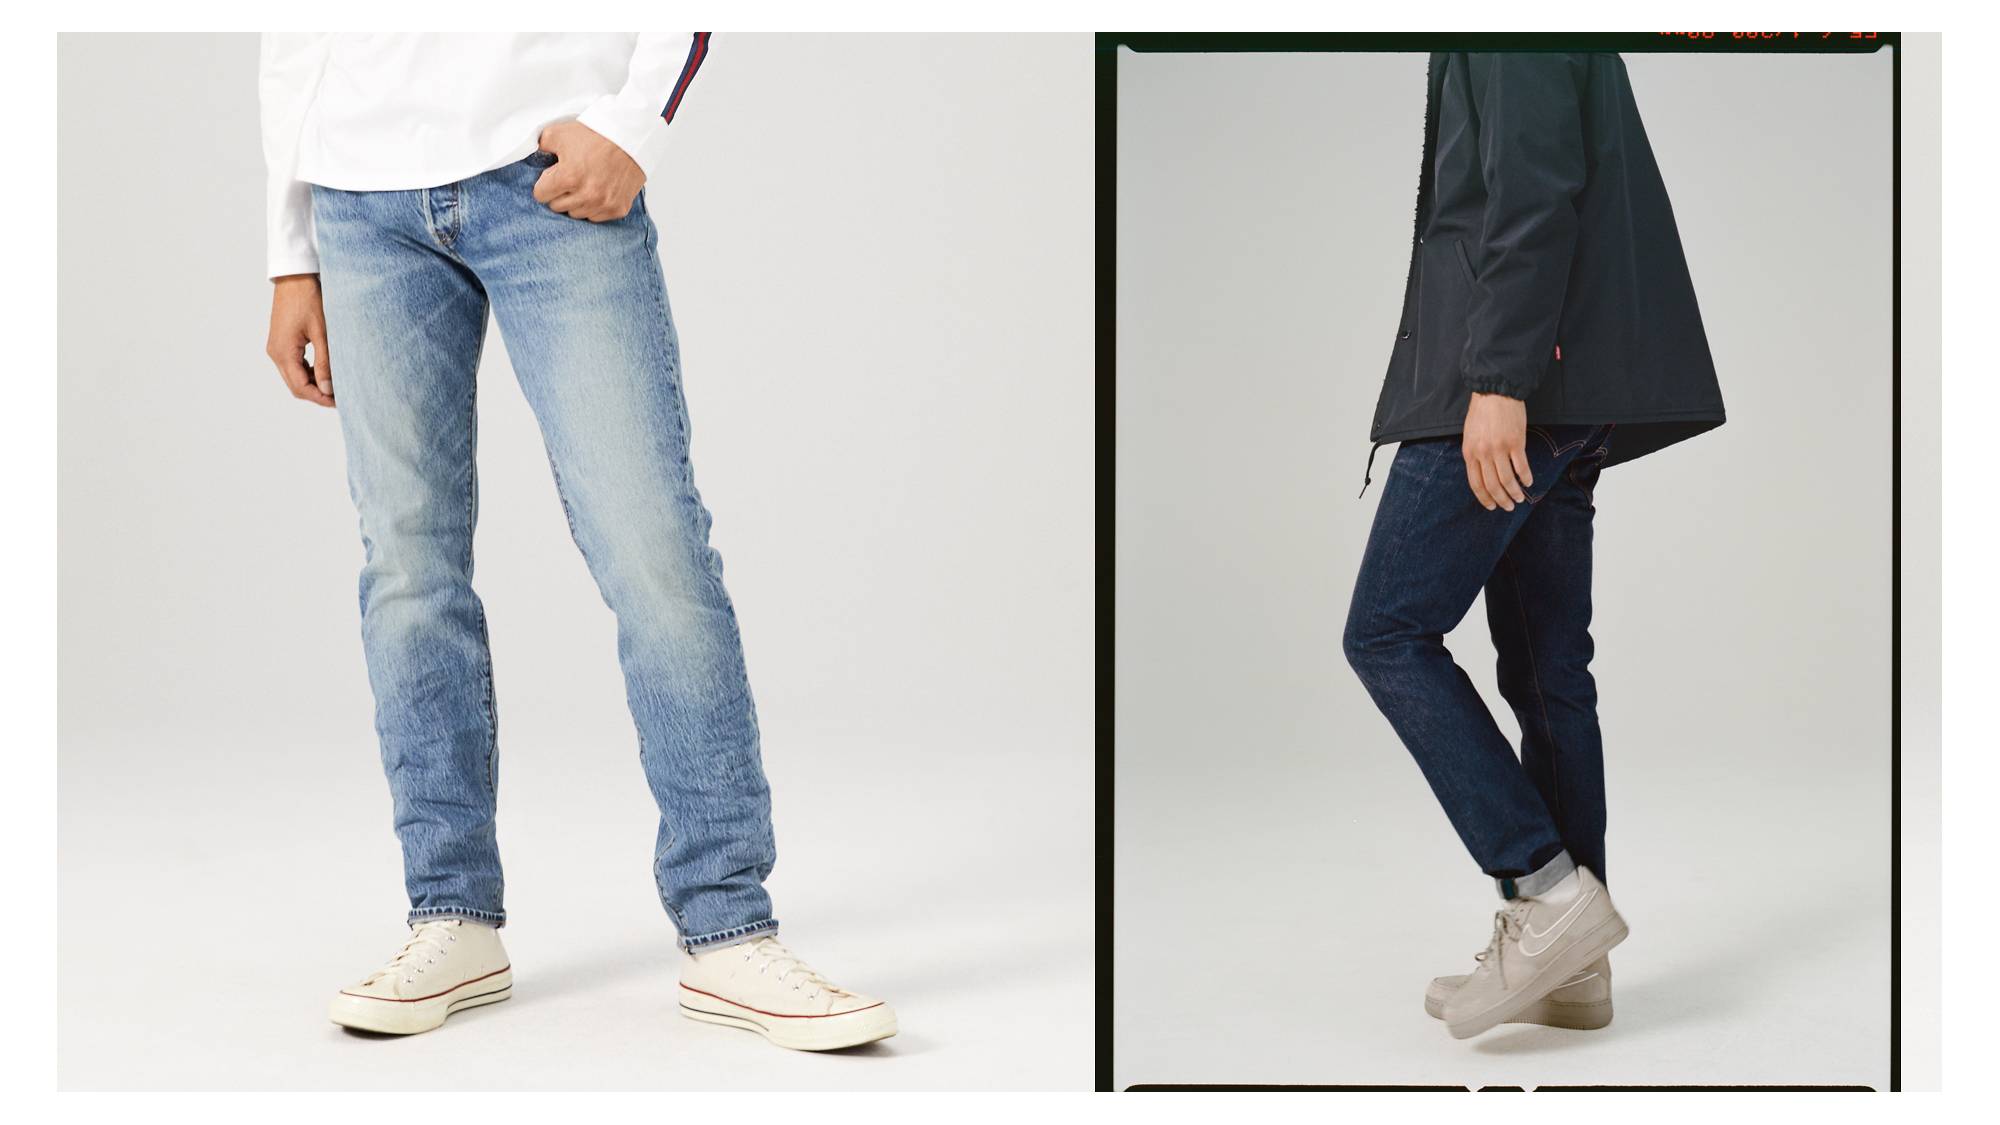 Mens Tapered Jeans, Tapered Fit Jeans